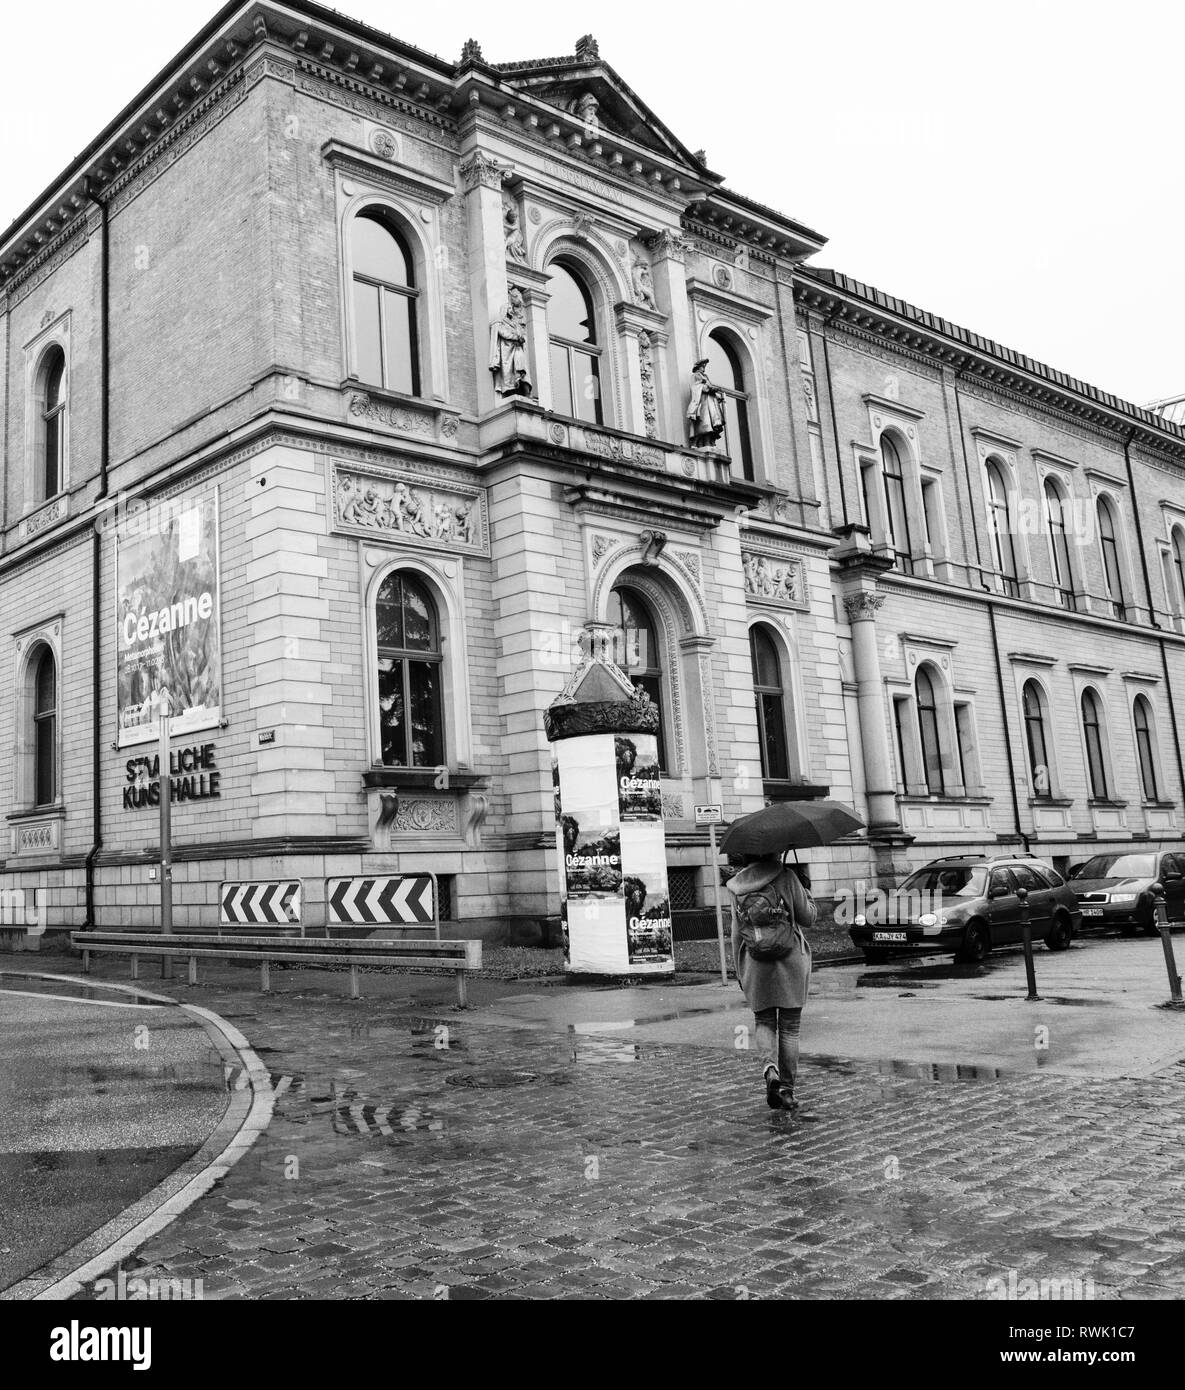 Karlsruhe, Germany - Oct 29, 2017: Young woman with umbrella walking toward Staatliche Kunsthalle Karlsruhe State Art Gallery on Hans-Thoma-Strasse street - black and white Stock Photo